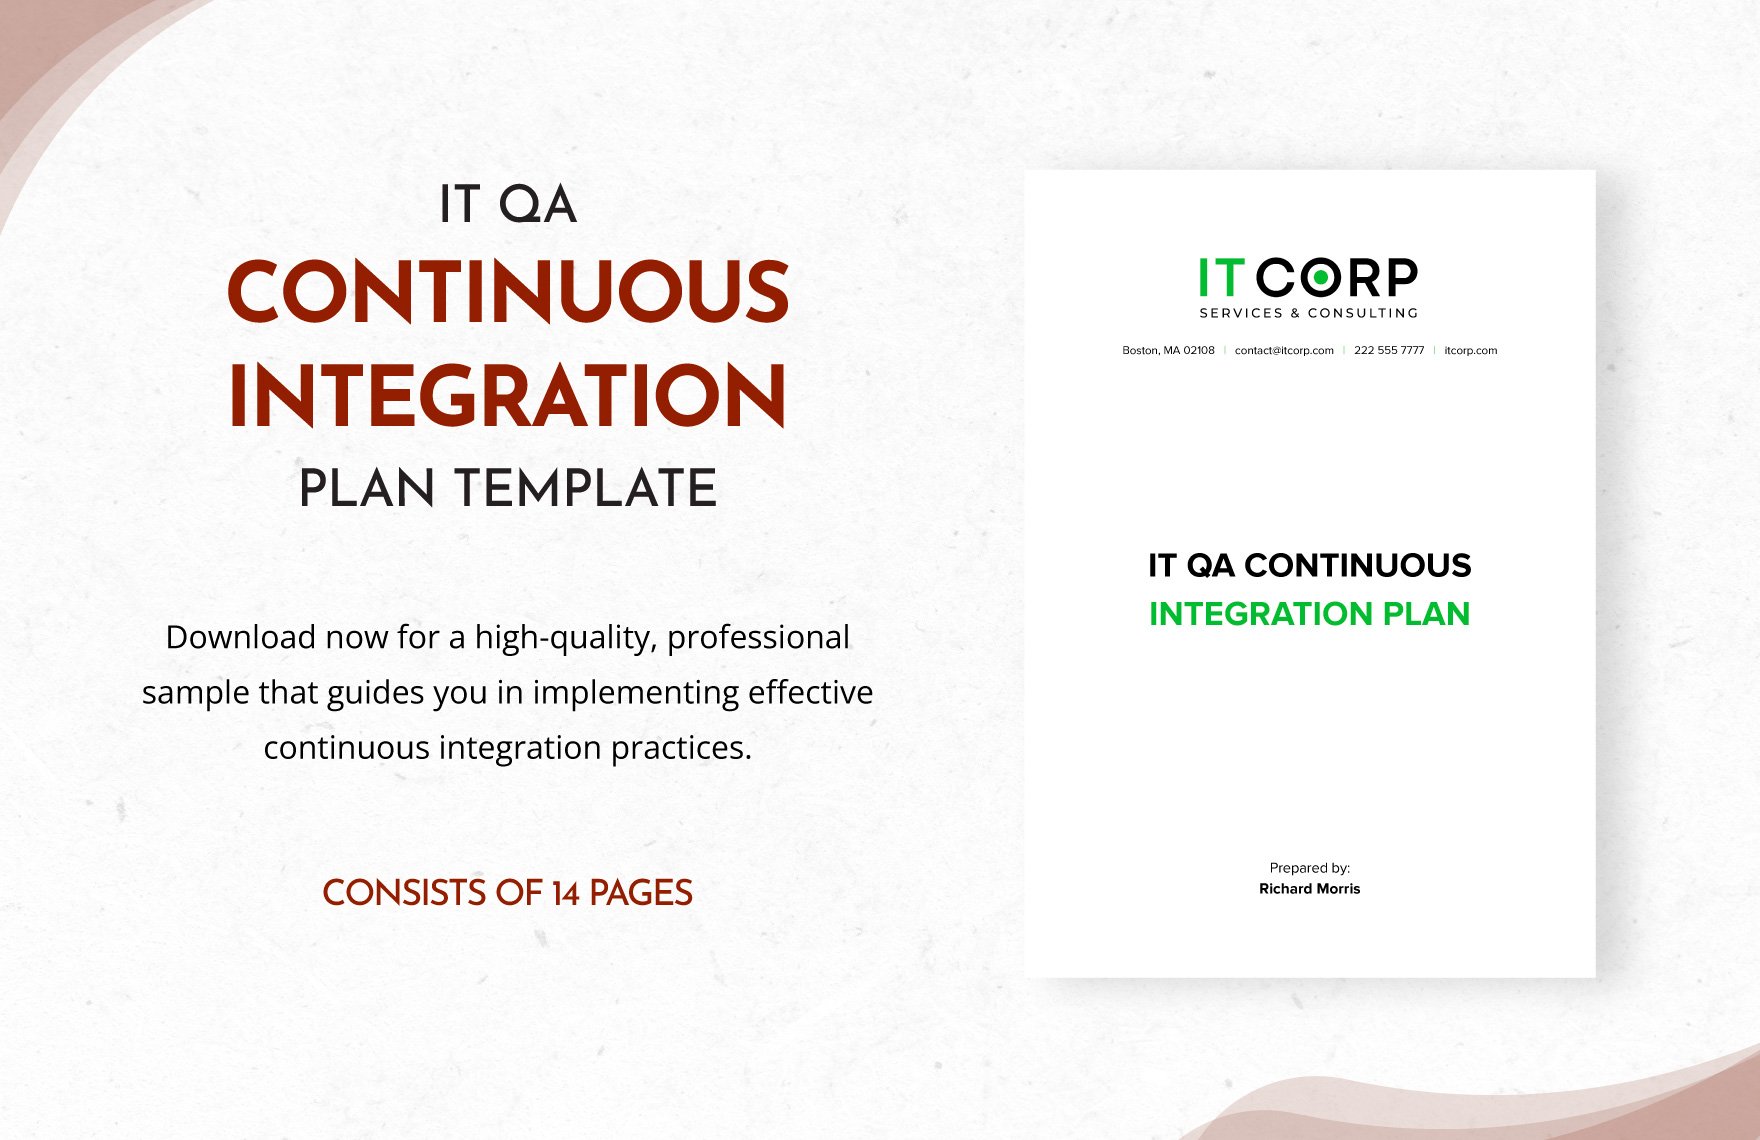 IT QA Continuous Integration Plan Template in Word, Google Docs, PDF